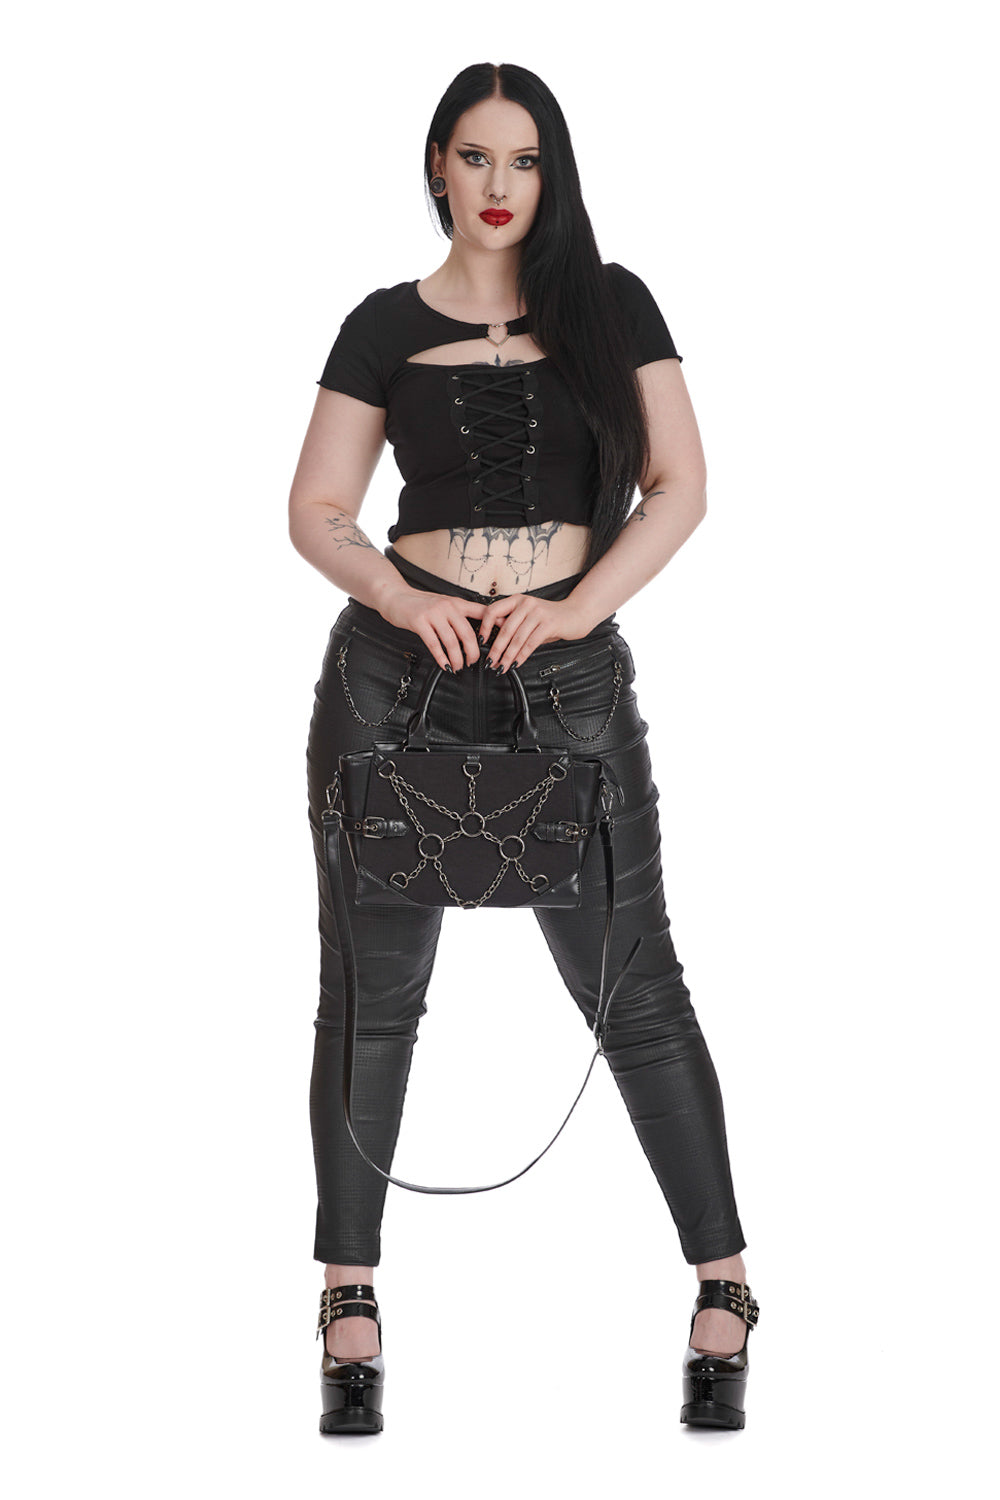 Banned Alternative THROUGH THE DARKNESS CORSETTE LACE TOP